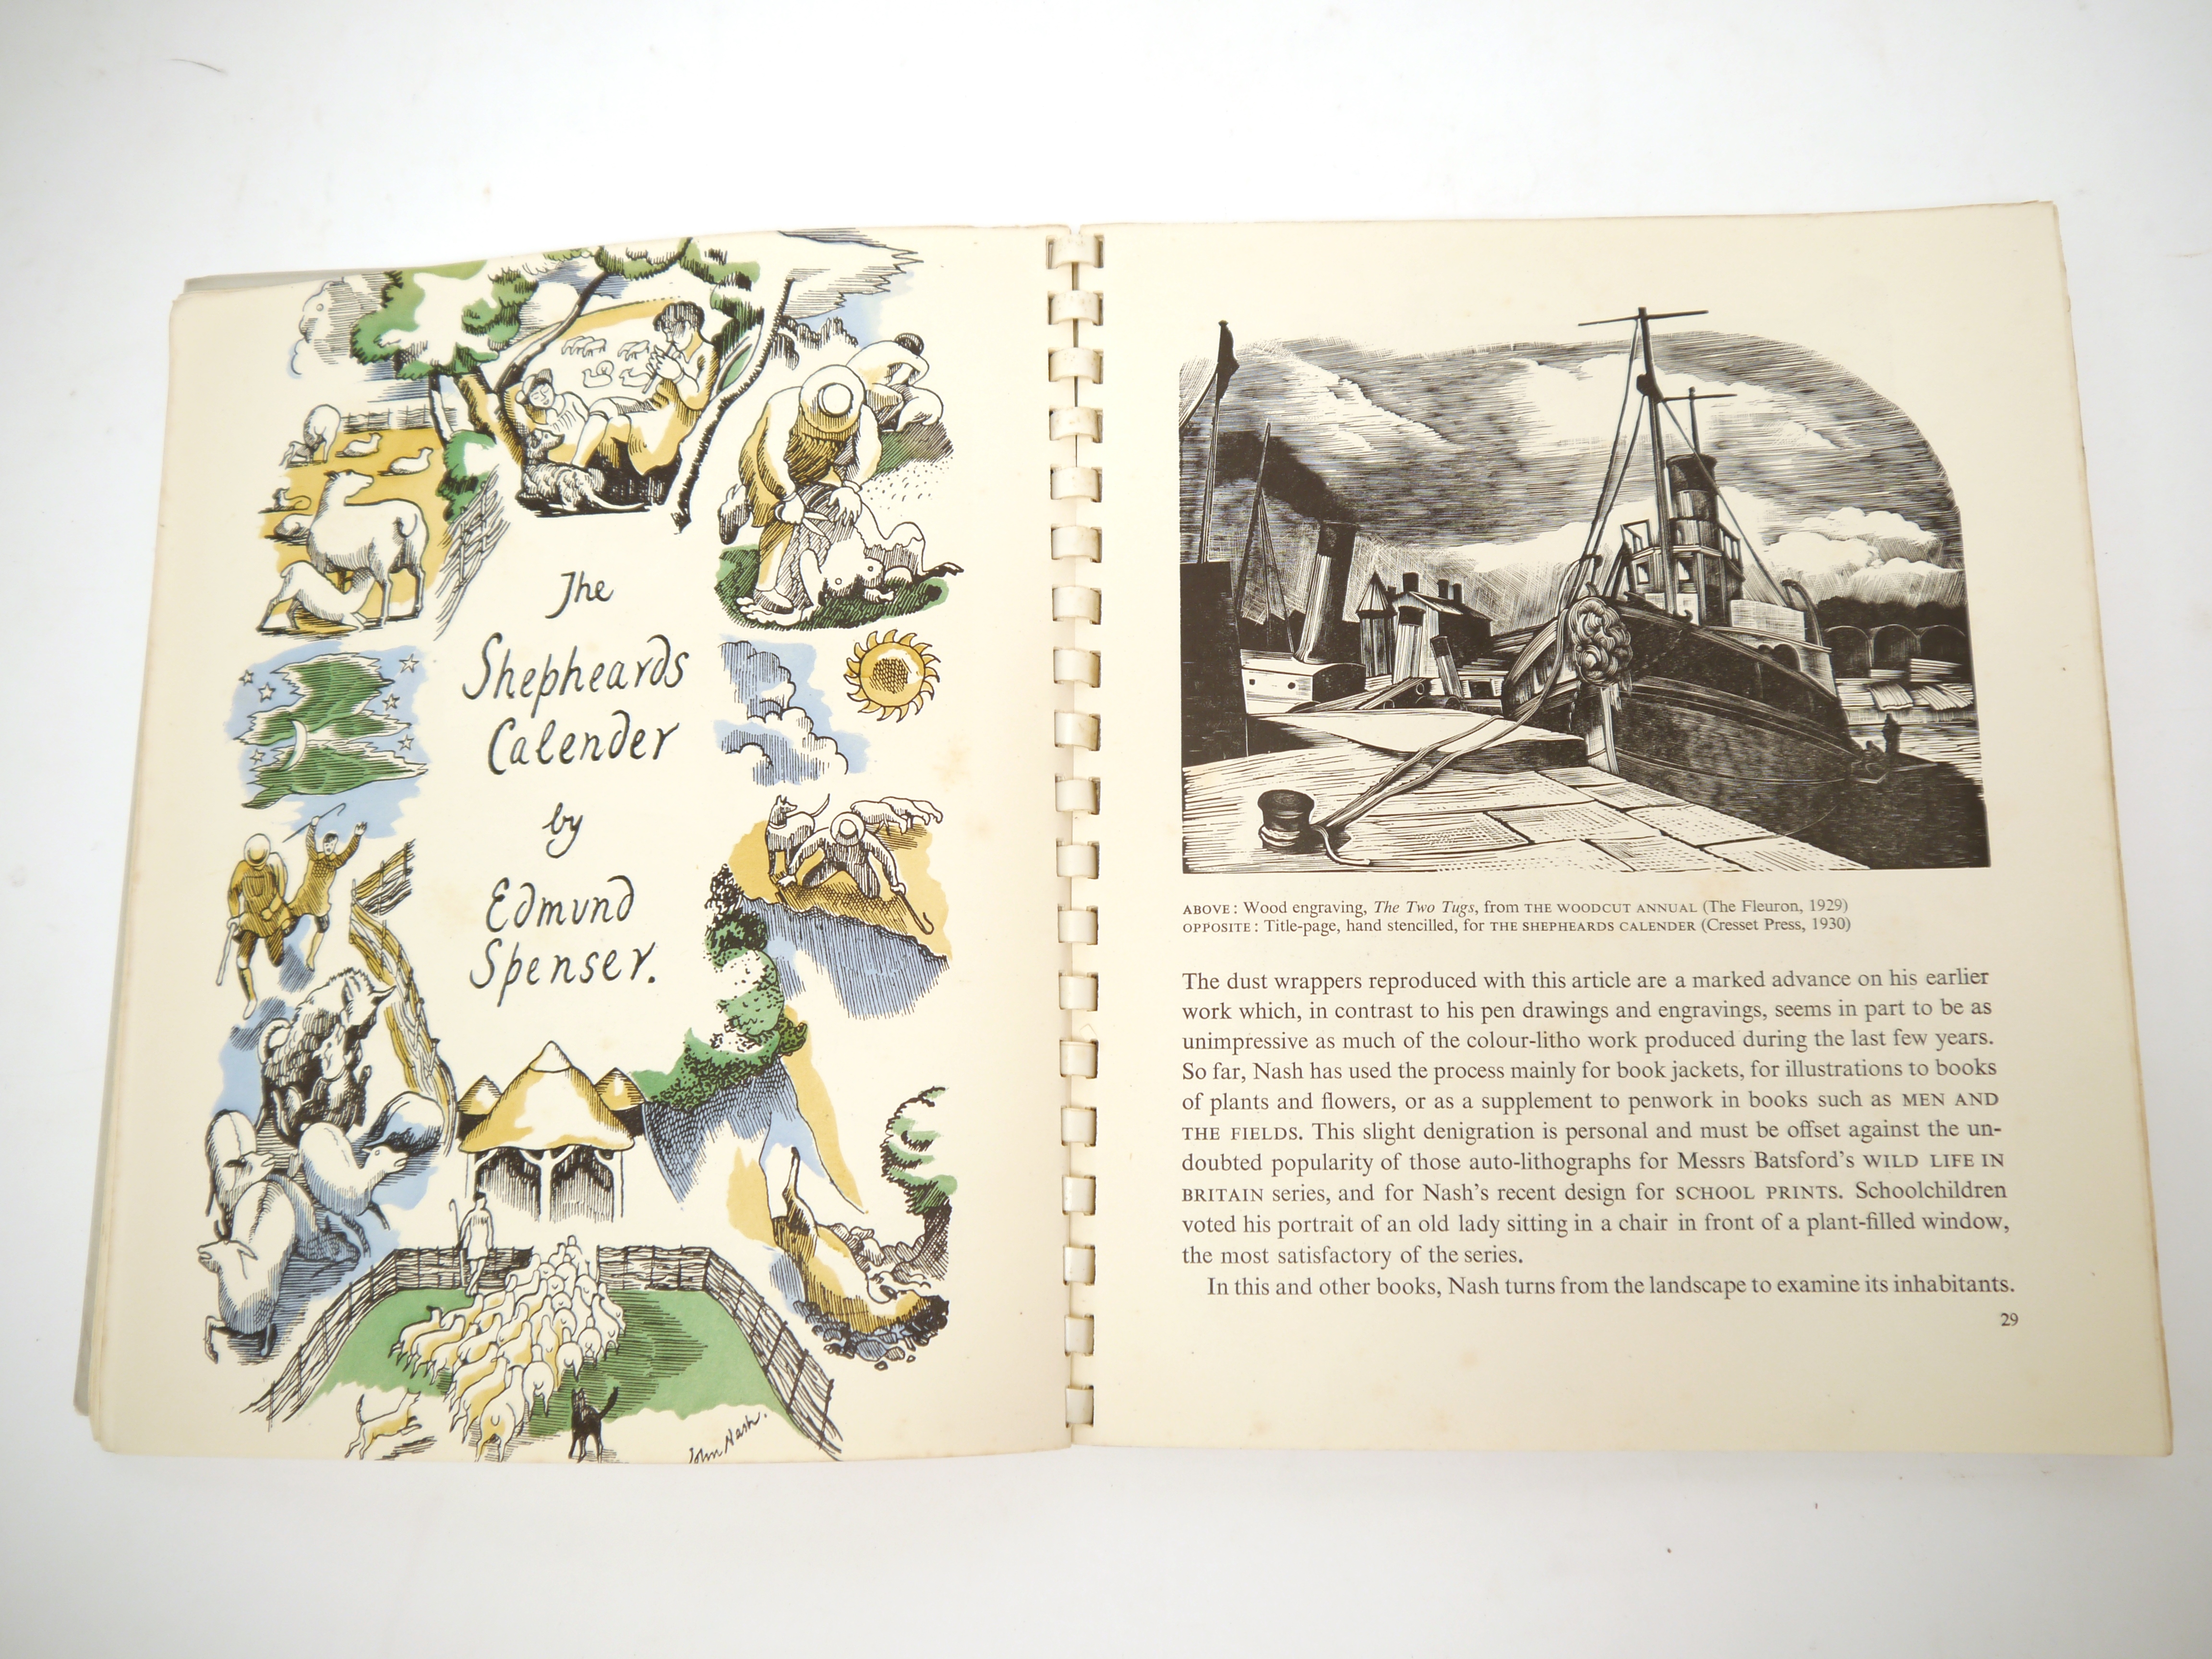 (Typography, Printing, Illustration, Early Ian Fleming in Print.), 'Alphabet & Image', Shenval - Image 15 of 31